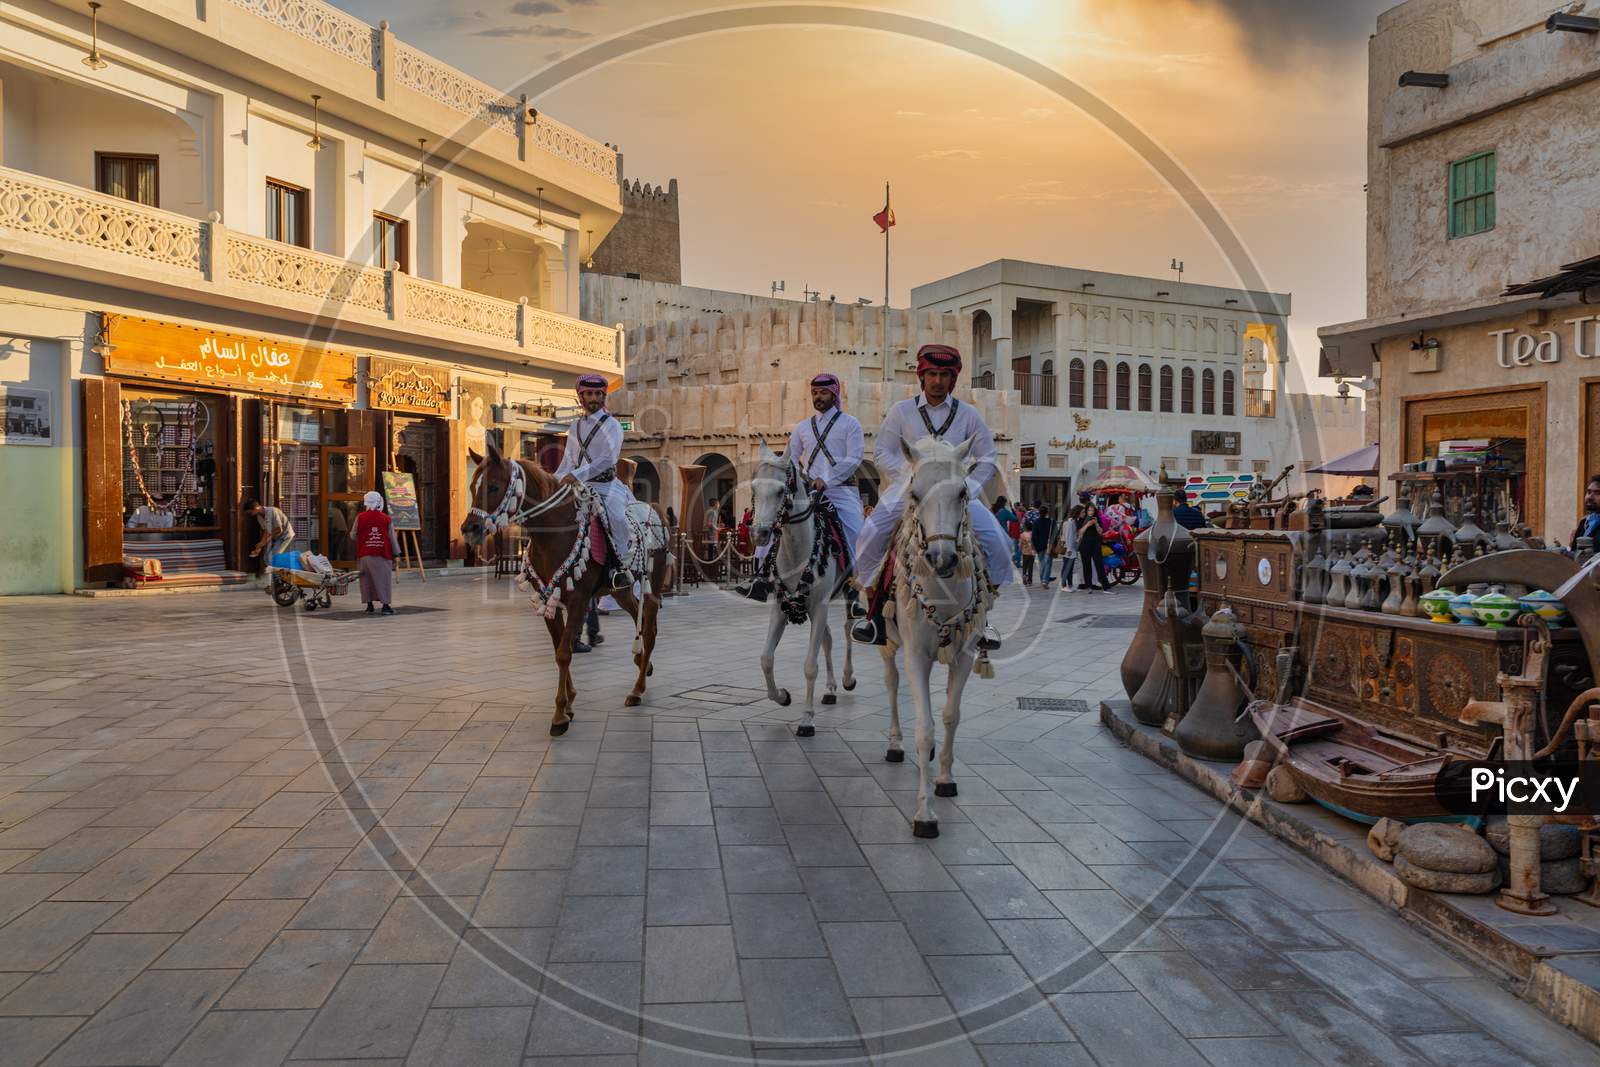 Souk Waqif Doha, Qatar main street daylight view  with traditional police riding horses and Qatari flag in background